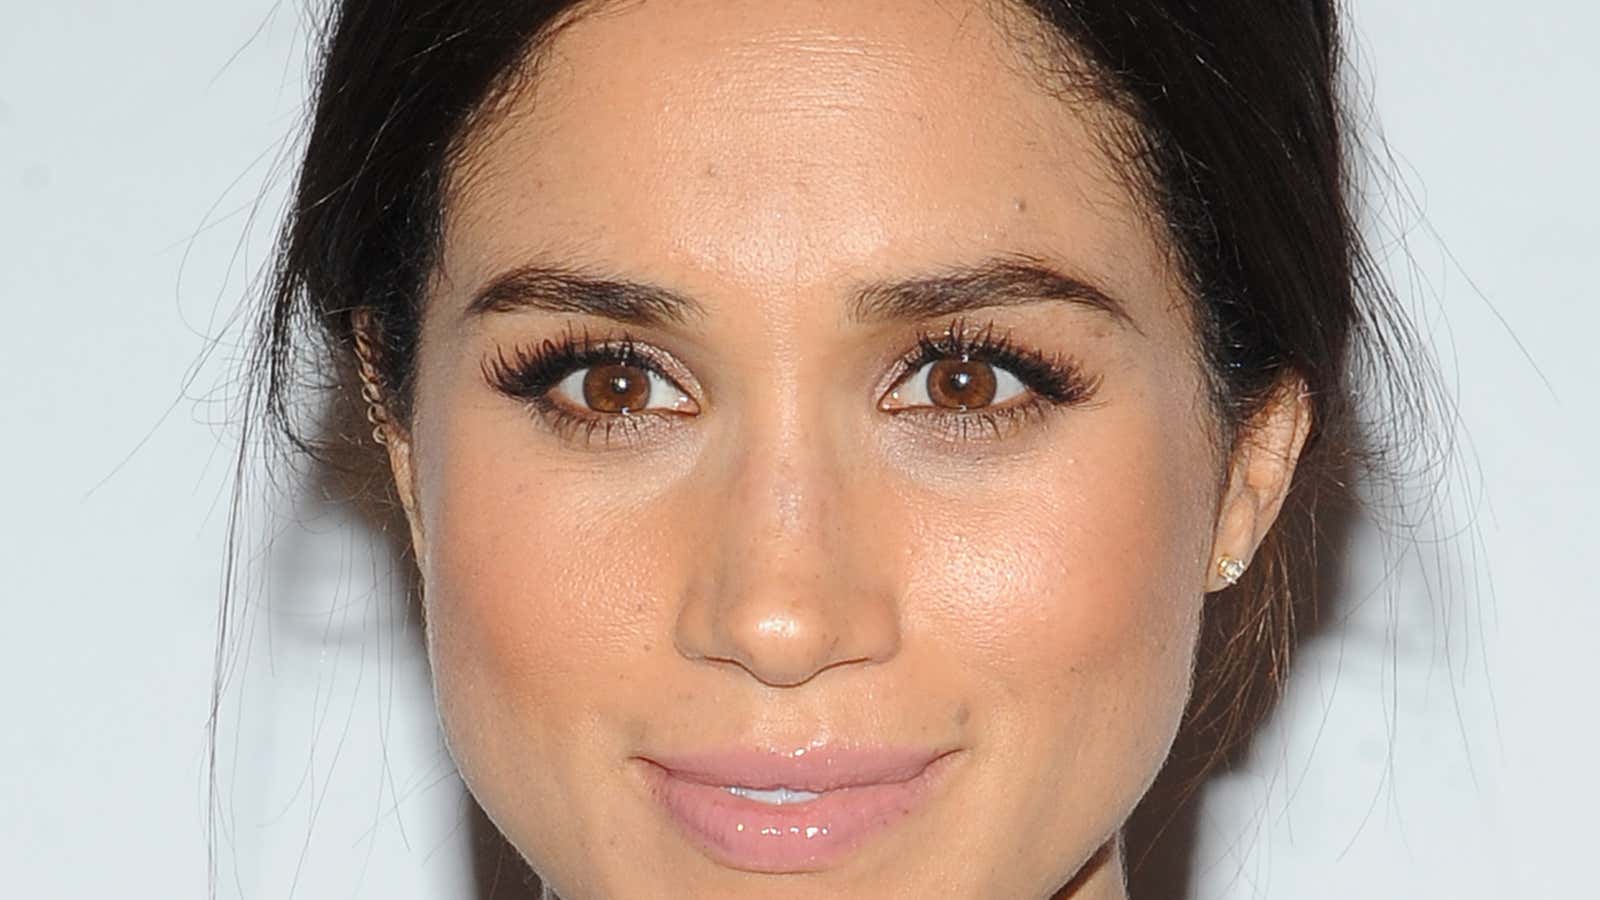 Even Meghan Markle needs a boost for her camera-ready lashes.